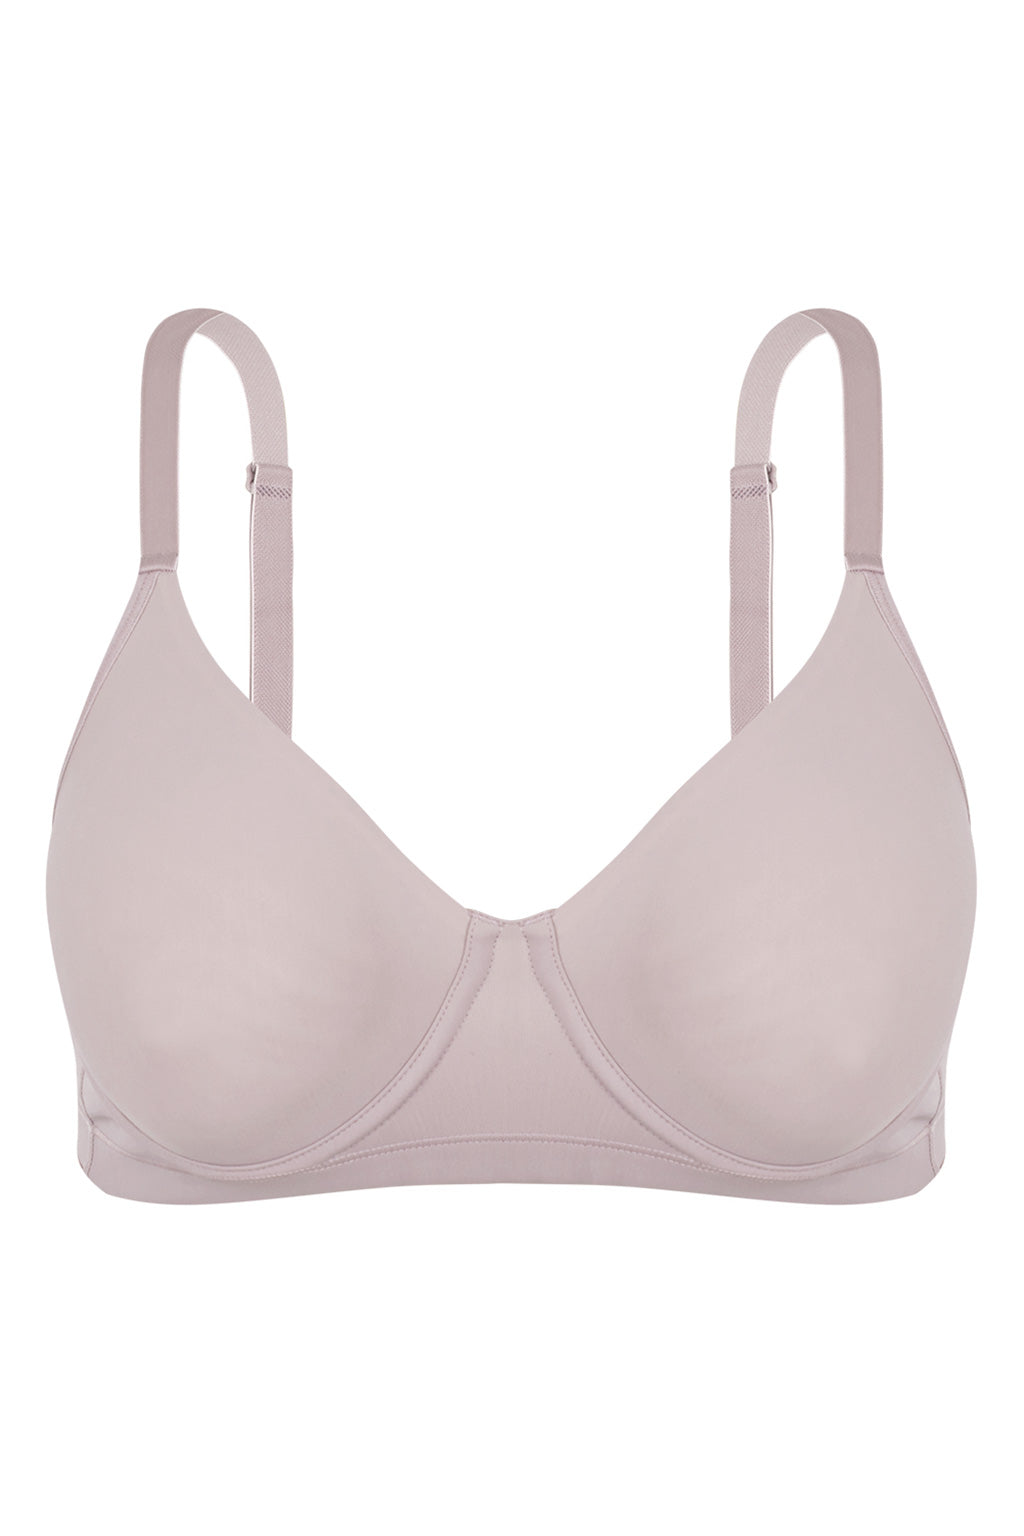 single Padded Ring Bra with Plane Cup And Flexible Stuff – 5050salepoint